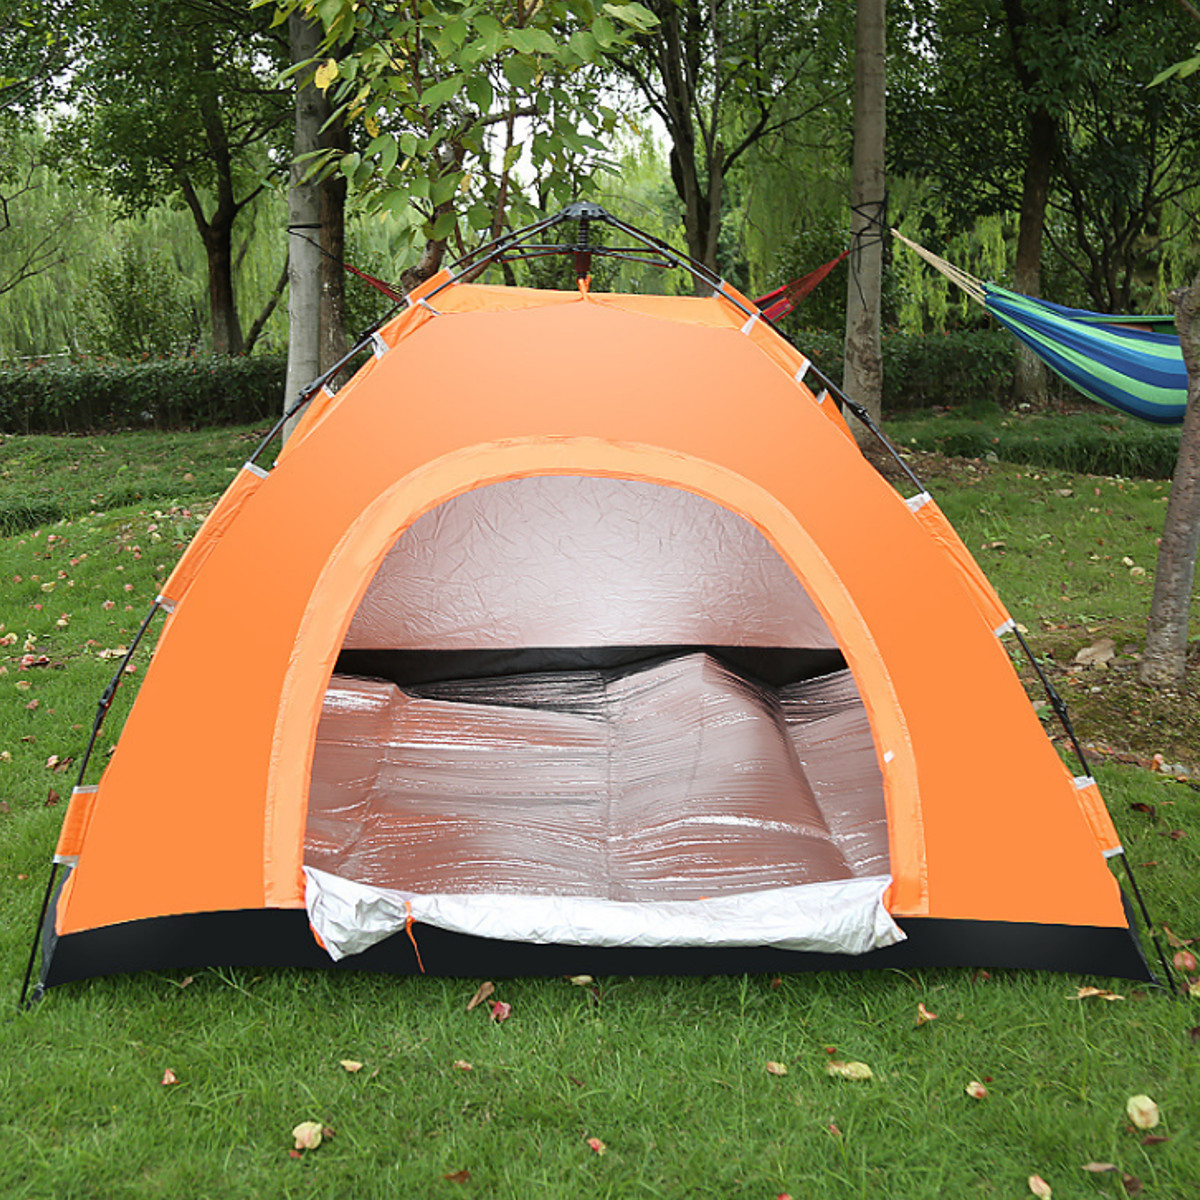 Outdoor-Double-sided-Tent-Mat-Aluminum-Film-Pad-Waterproof-Camping-Picnic-Blanket-1514848-8